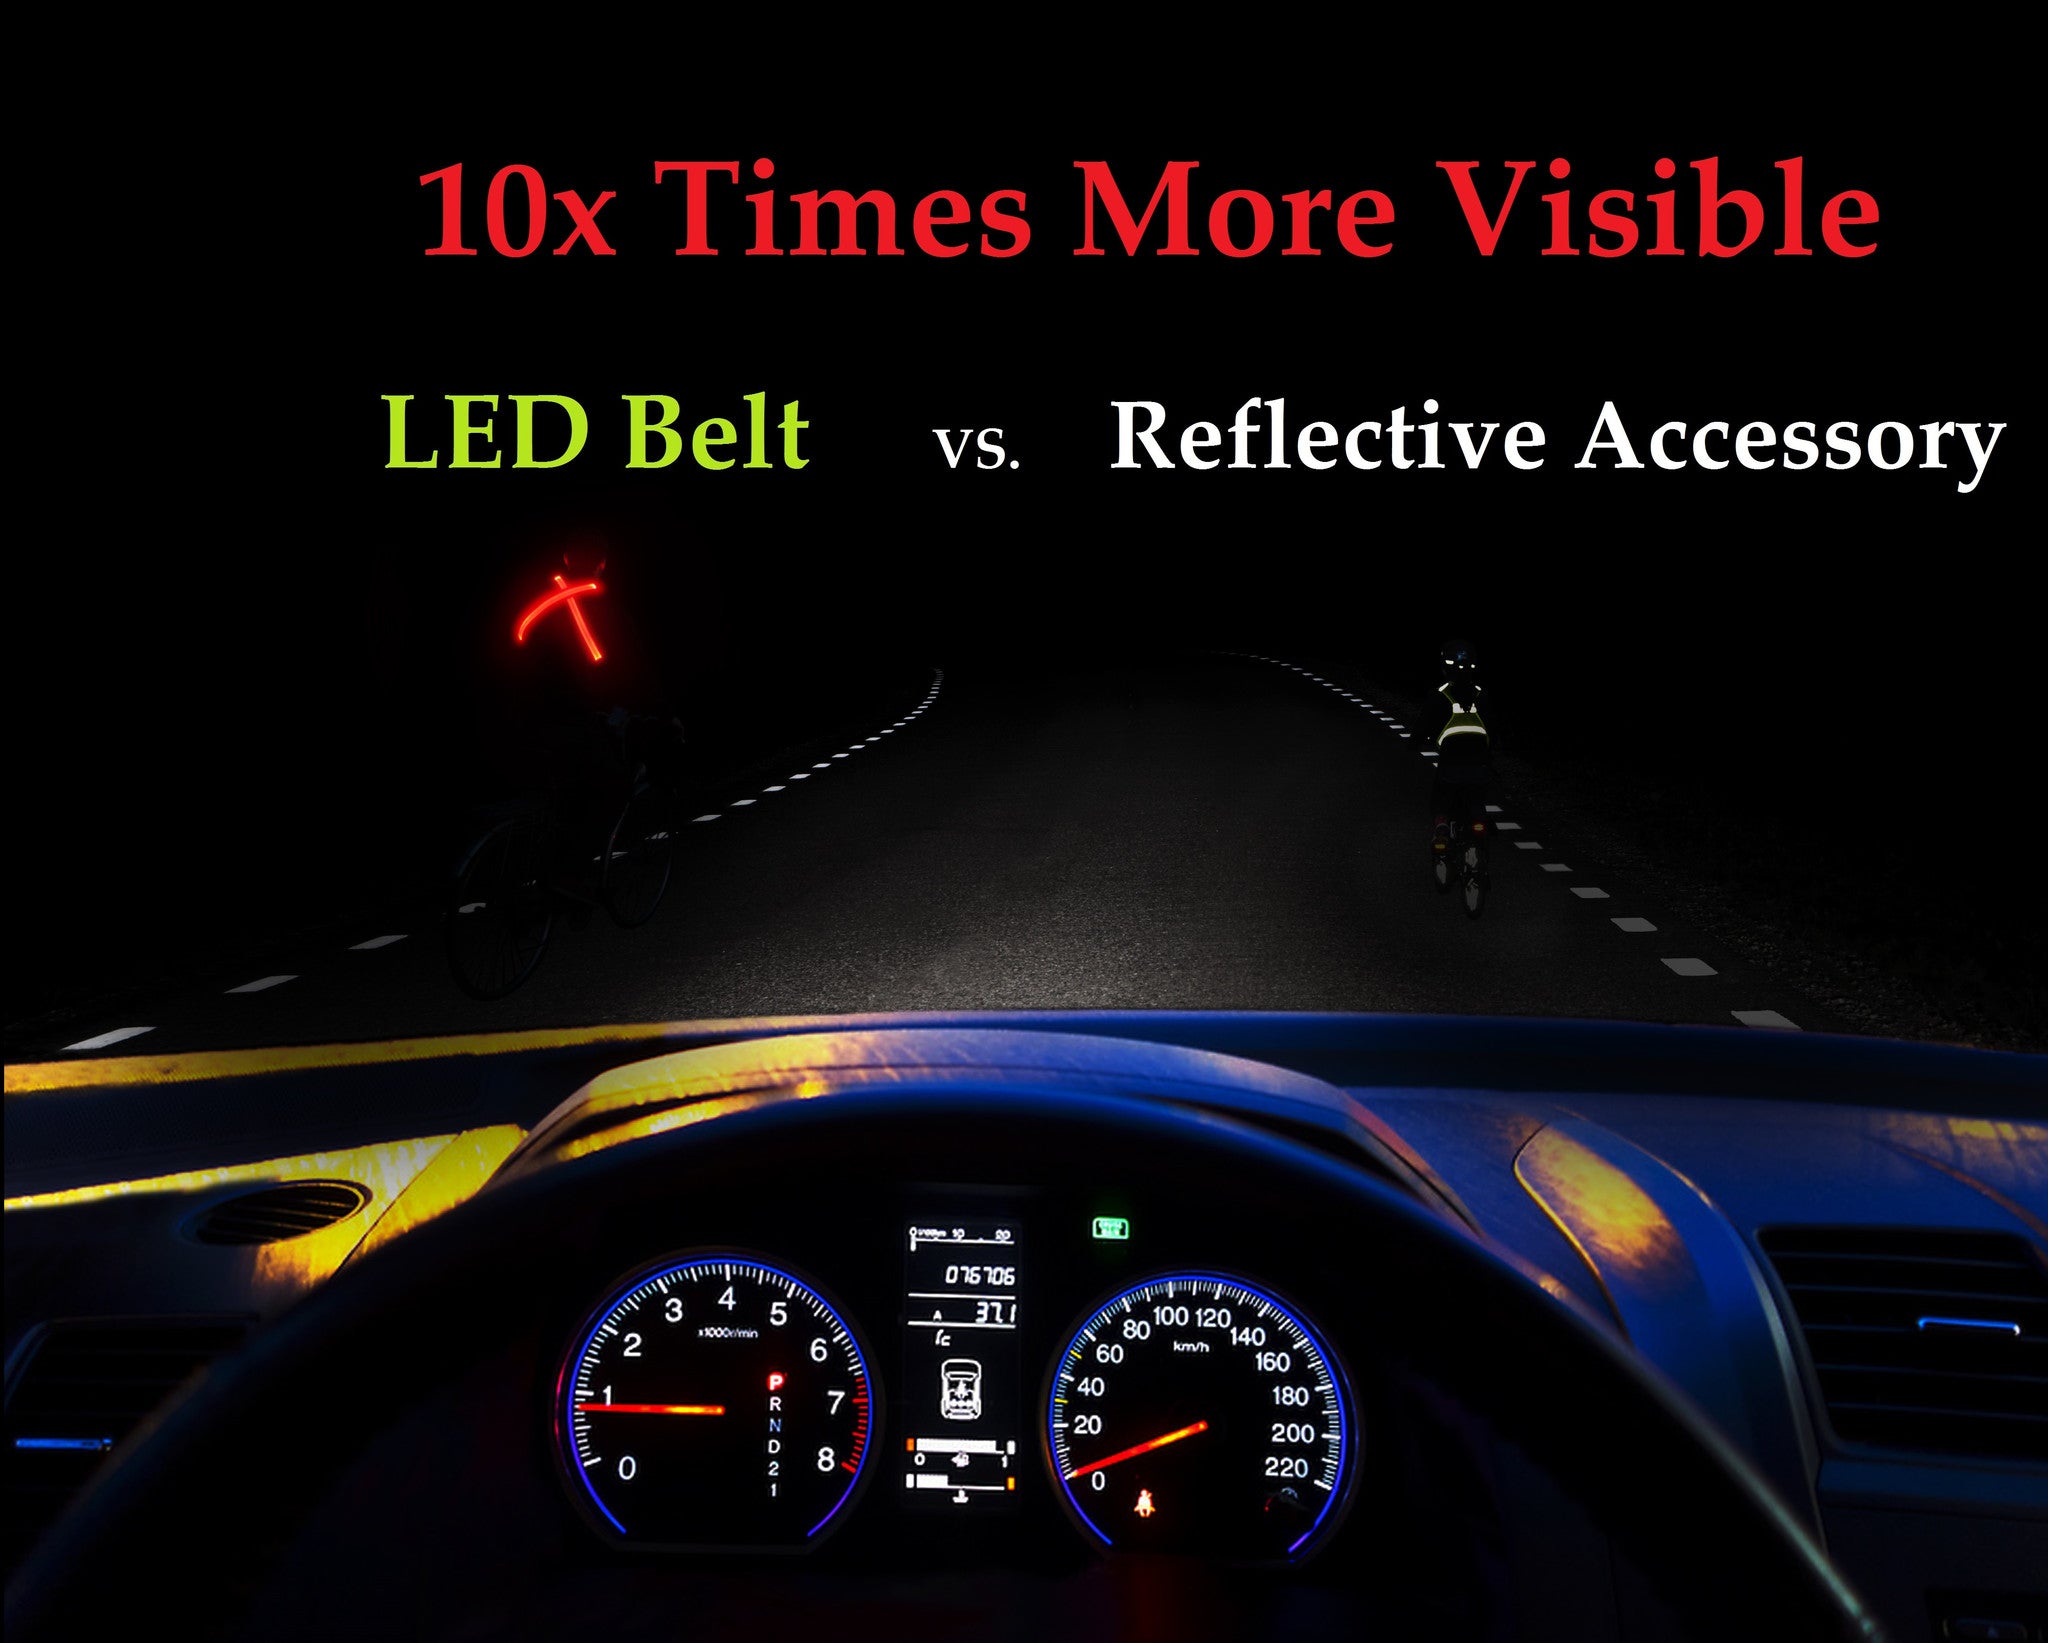  ILLUMISEEN LED Reflective Belt Sash, High Visibility LED  Lights with 2 Lighting Modes, Adjustable Quick Release Buckle, USB  Rechargeable, No Batteries Needed